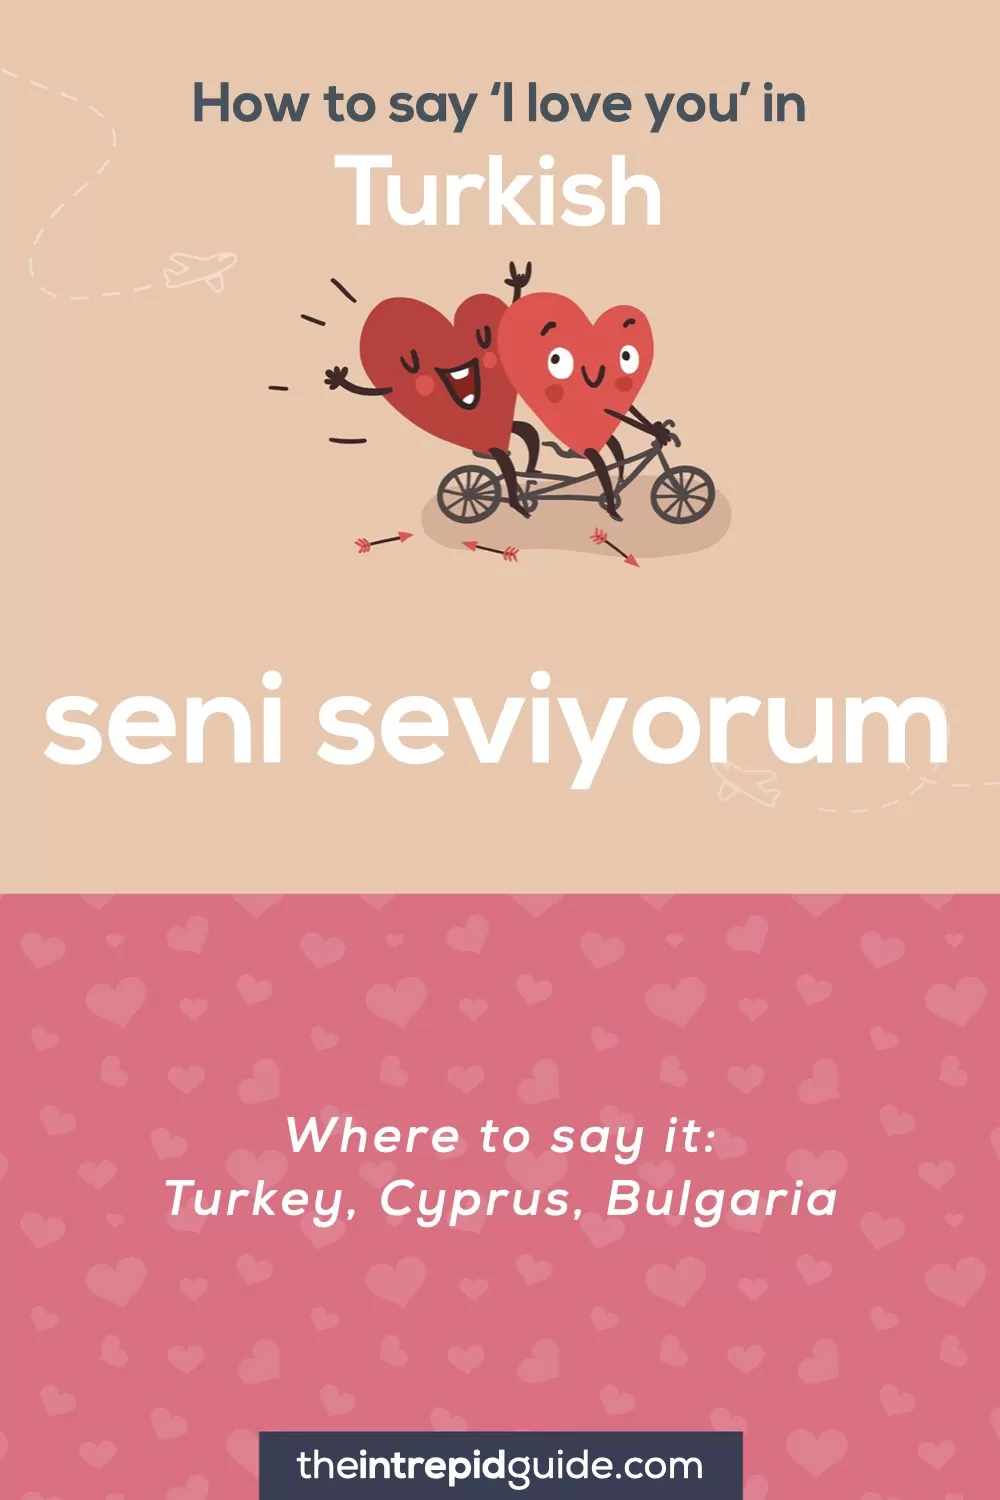 How to say I love you in different languages - Turkish - seni seviyorum